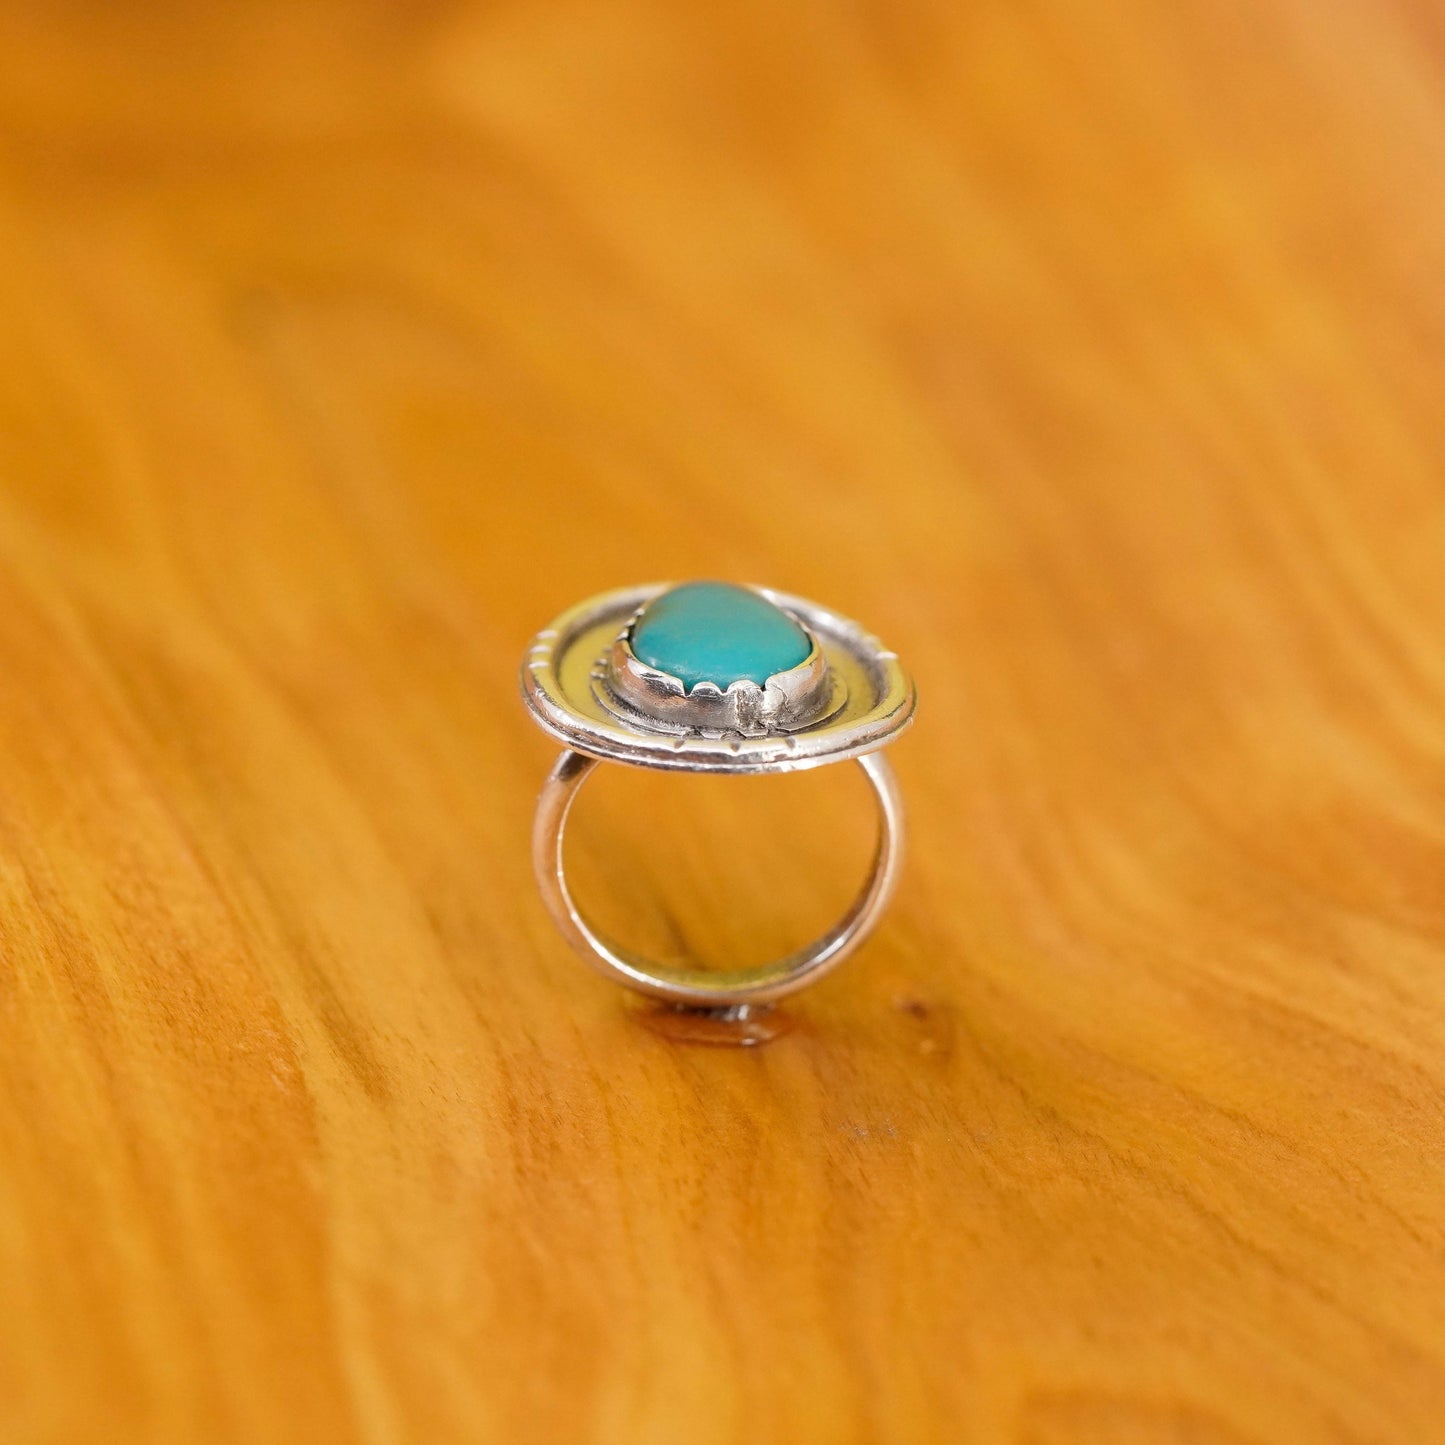 Size 4.5, vintage Sterling 925 silver handmade ring with teardrop turquoise